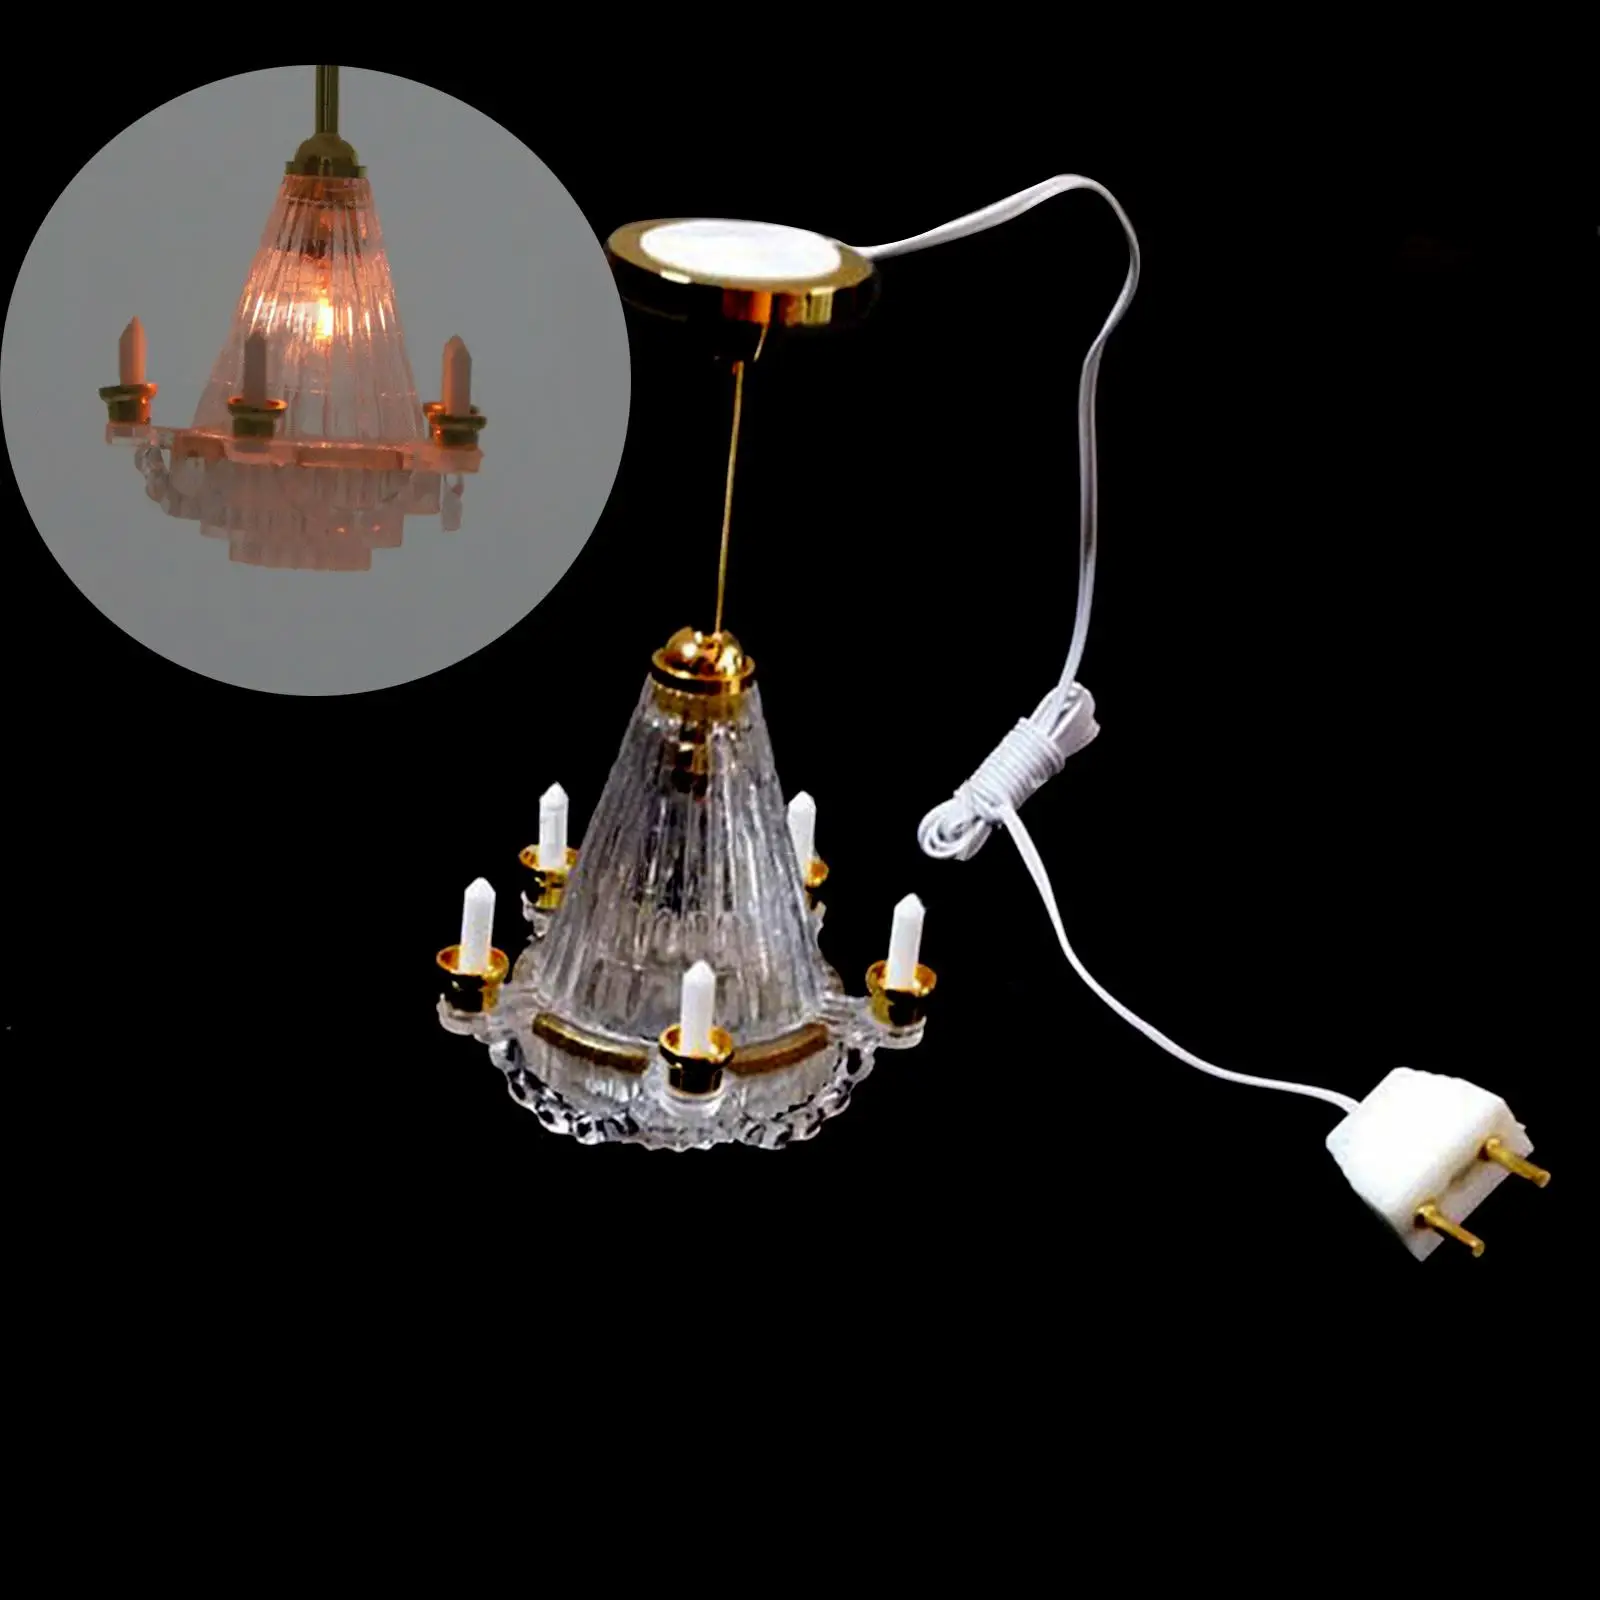 1/12 LED Chandelier Ceiling Lamp Model Toy Retro Style for Doll House Accessory Living Room Decor Bedroom